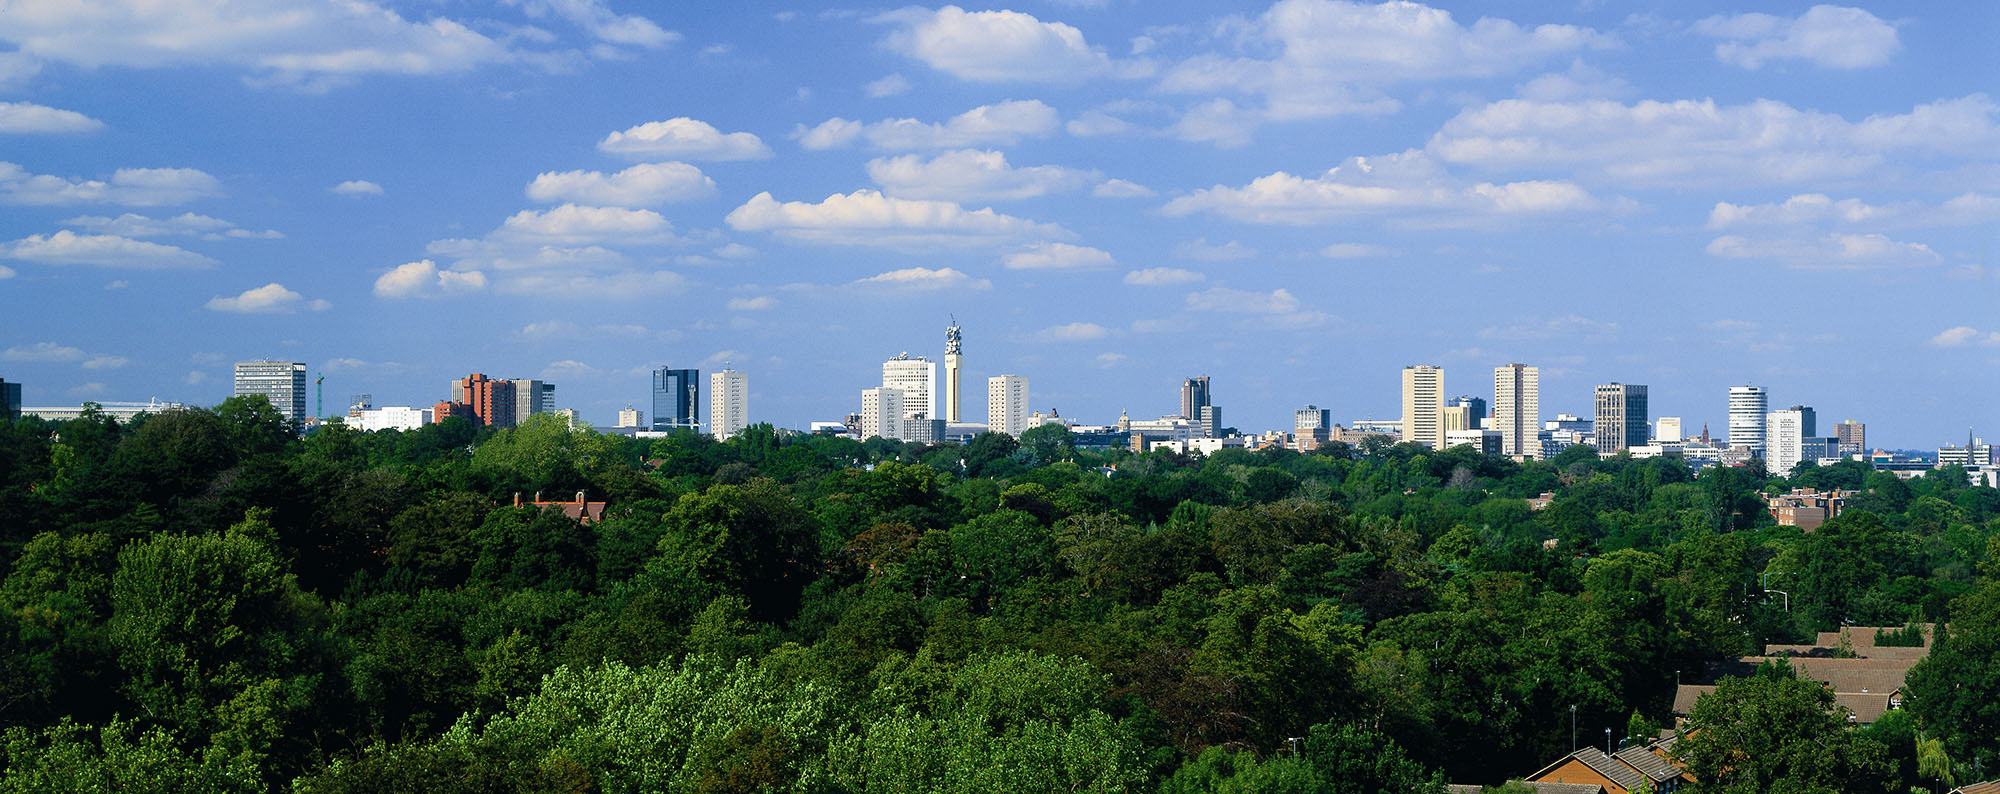 City skyline showing an extensive tree canopy in the Edgbaston Conservation Area